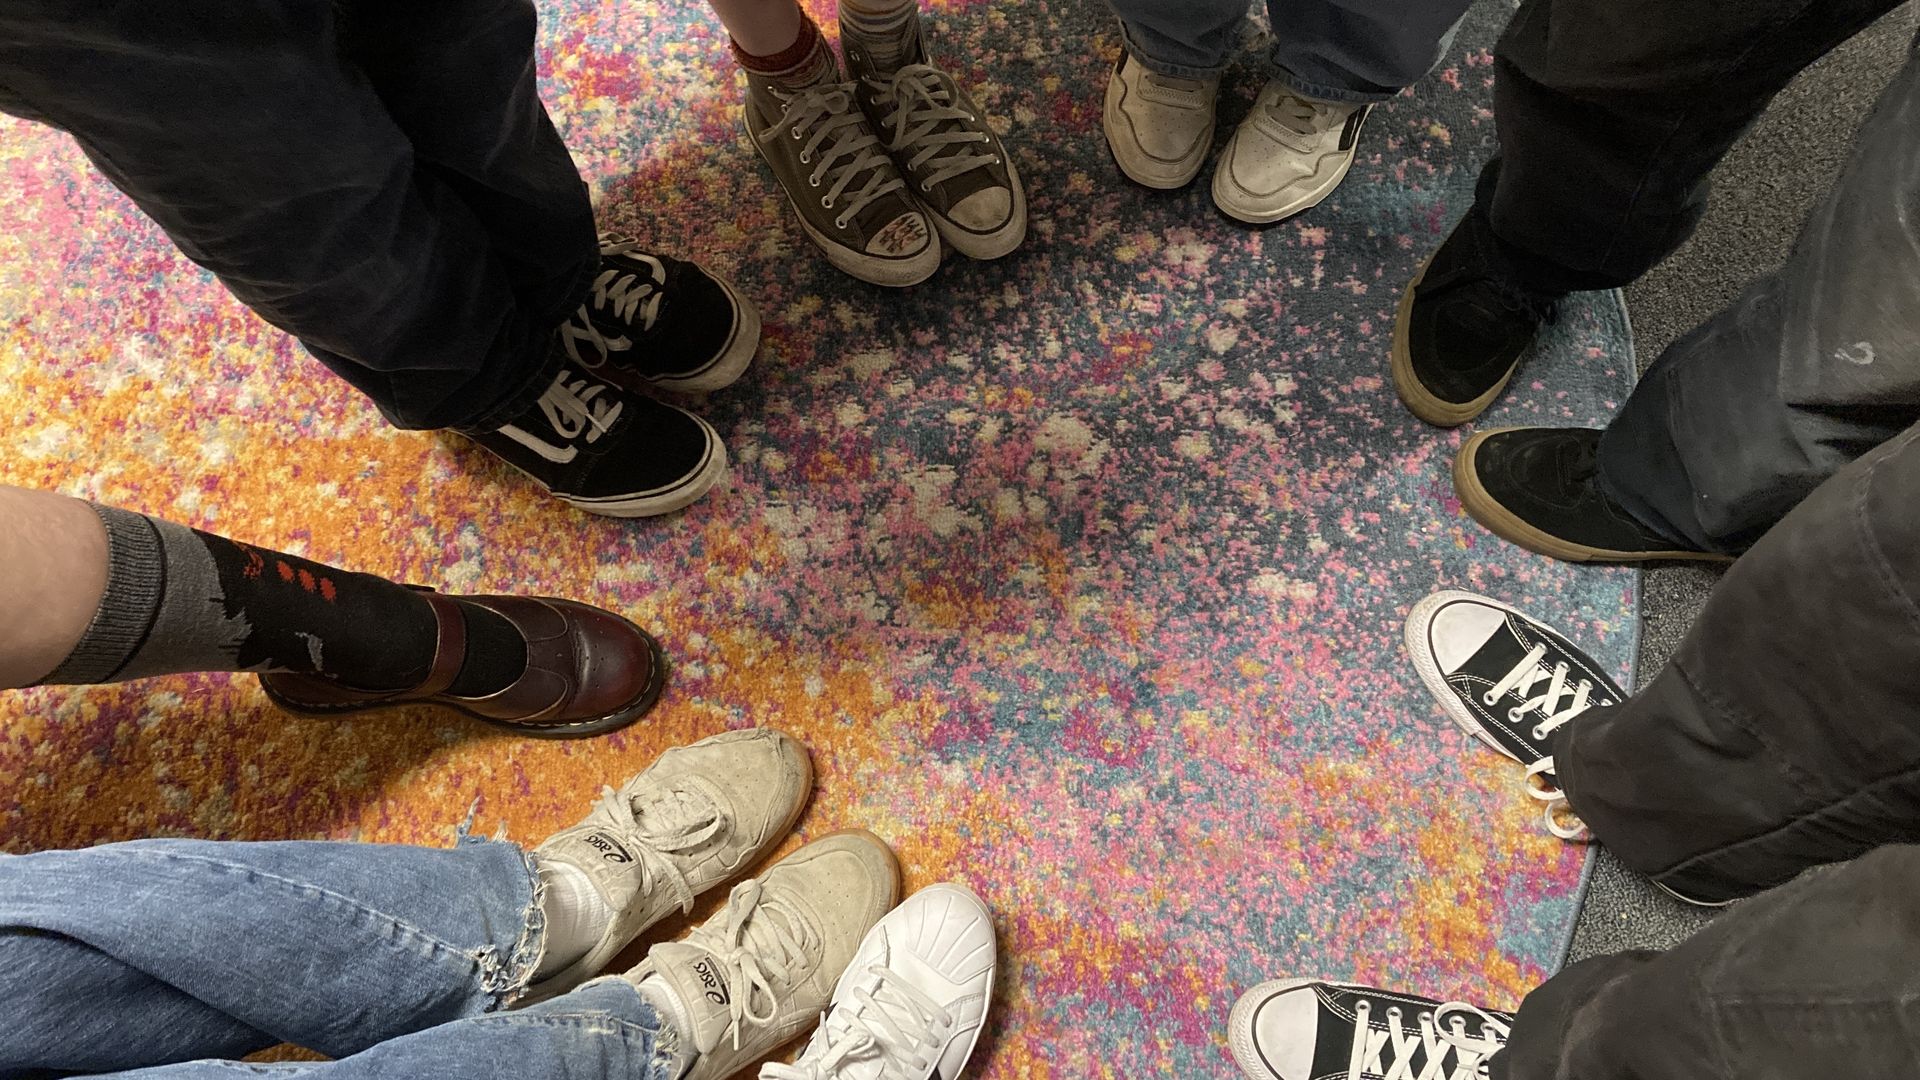 The feet of eight people, all wearing different shoes, in a circle on a multicolored carpet.